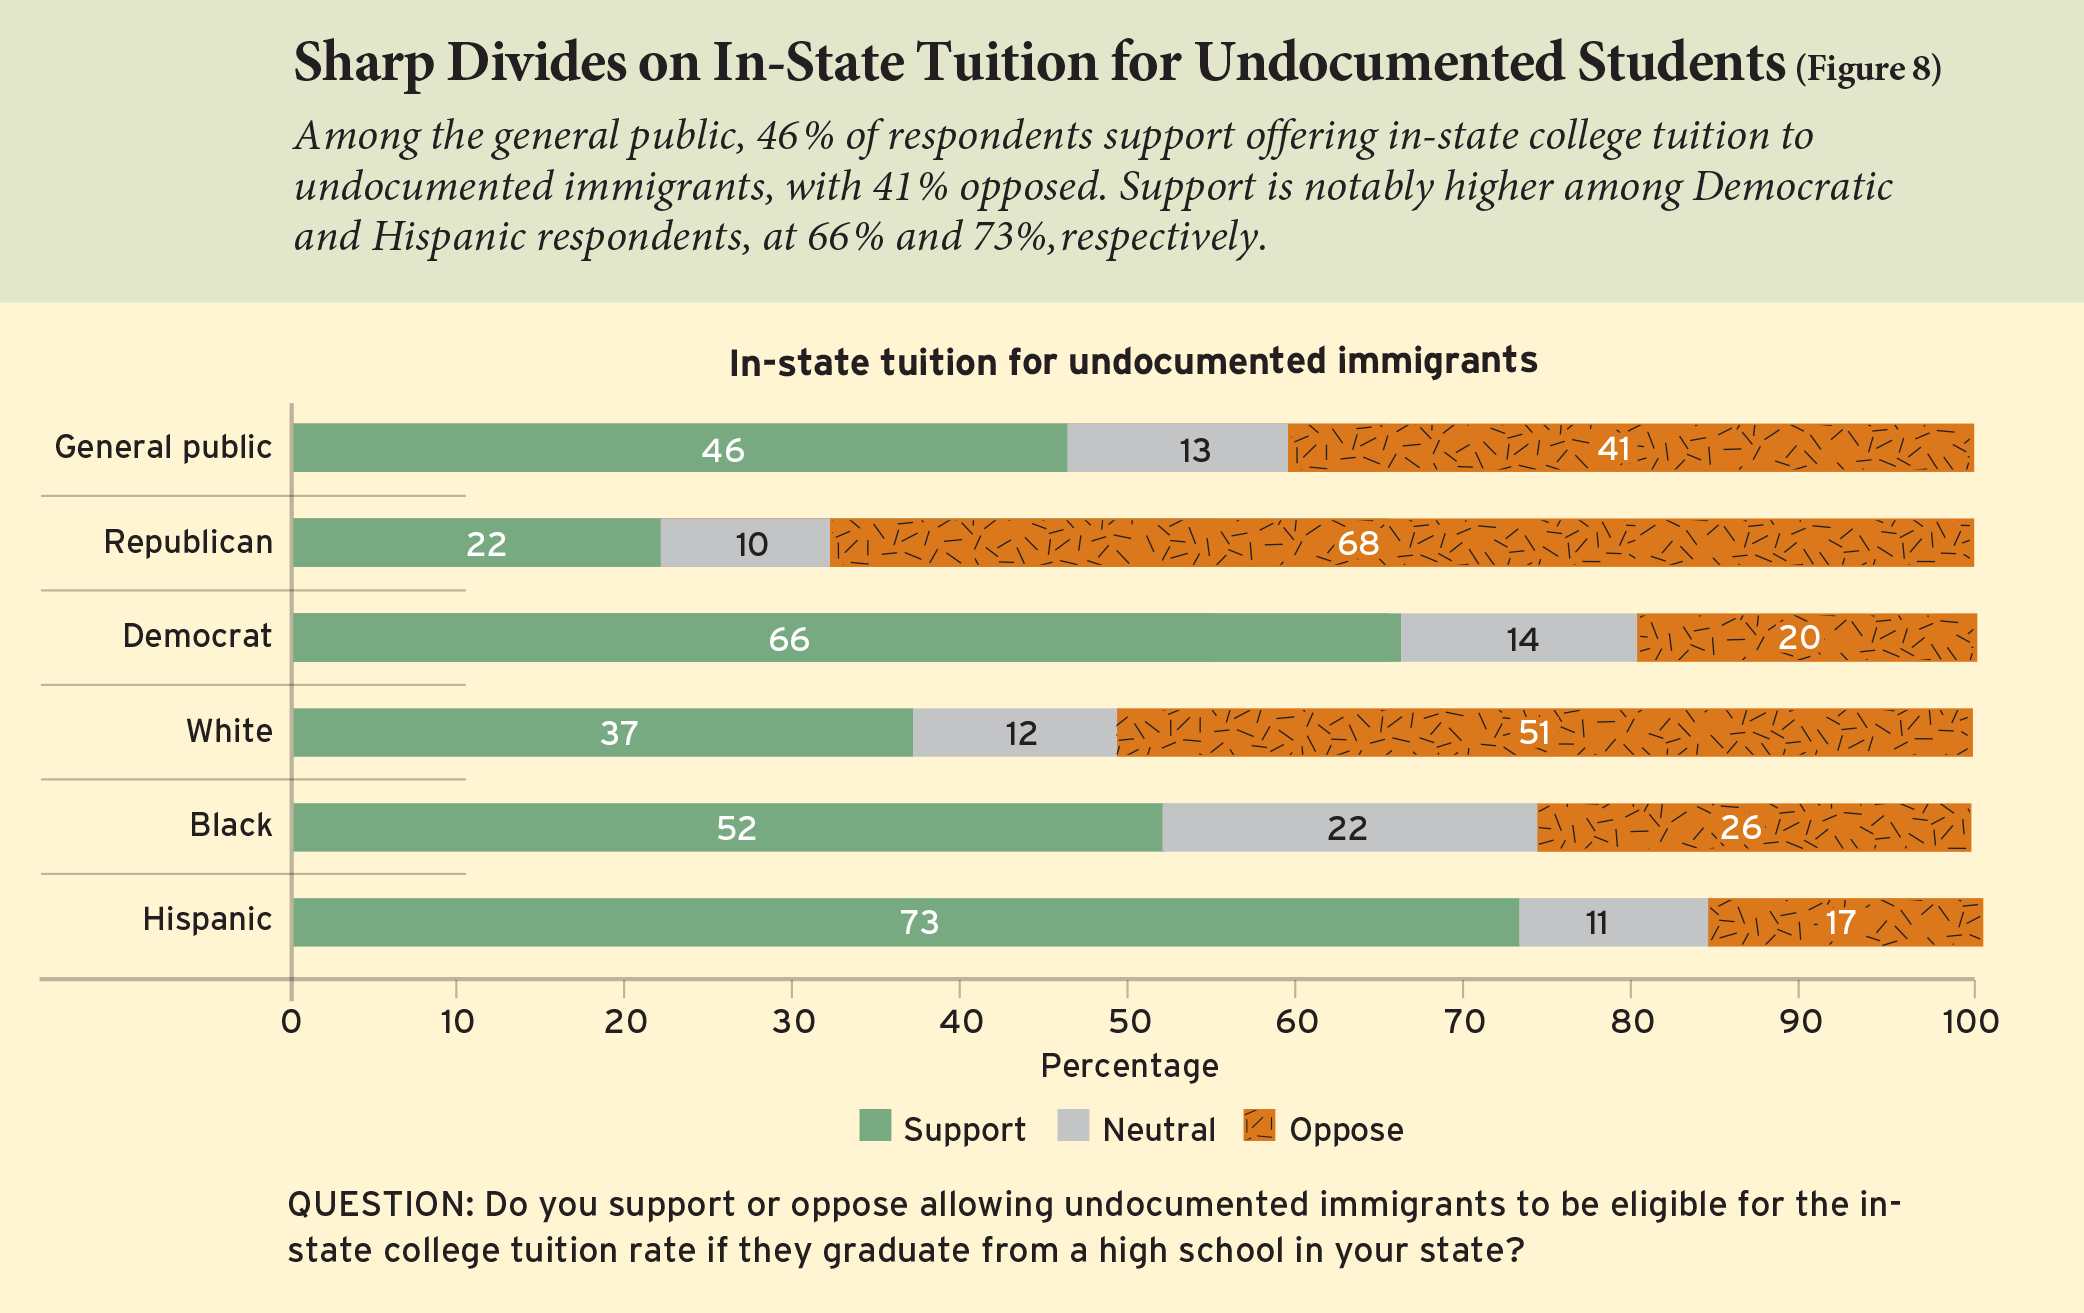 Figure 8: Sharp Divides on In-State Tuition for Undocumented Students